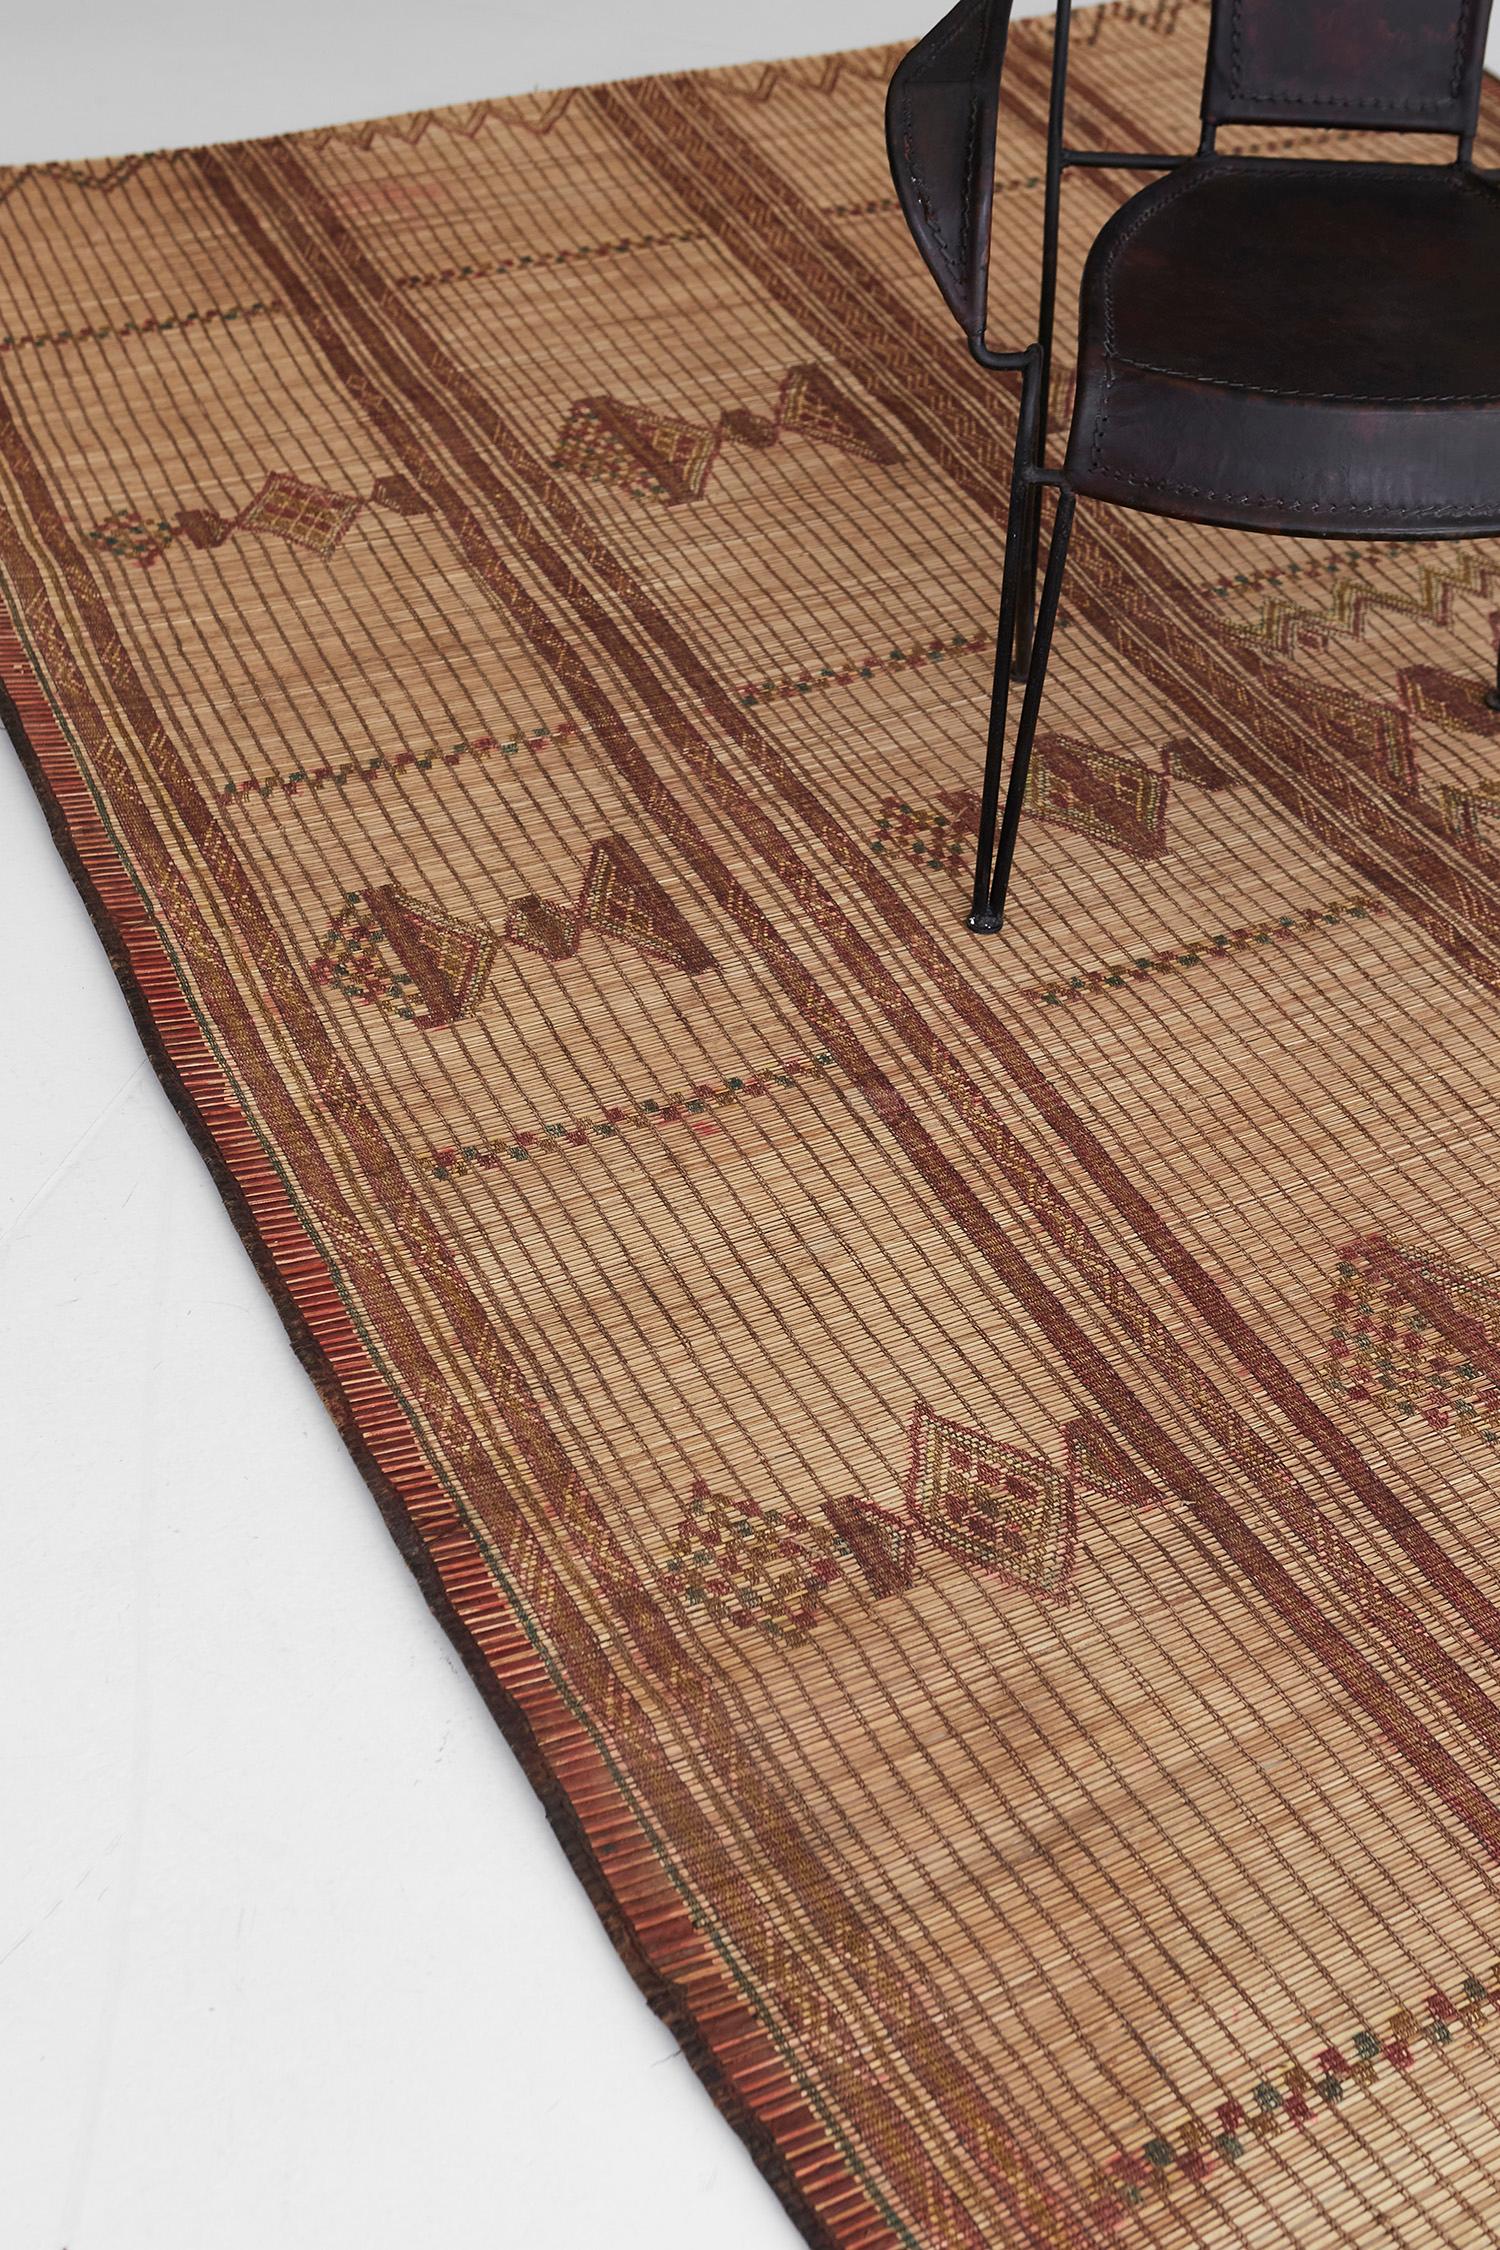 This phenomenal handwoven reed and leather Tuareg mat feature all the elegant thin outlined diamonds and zigzag patterns. This mat can give an accent to any contemporary and minimalist interiors. It adds a sense of fashion and style that everybody